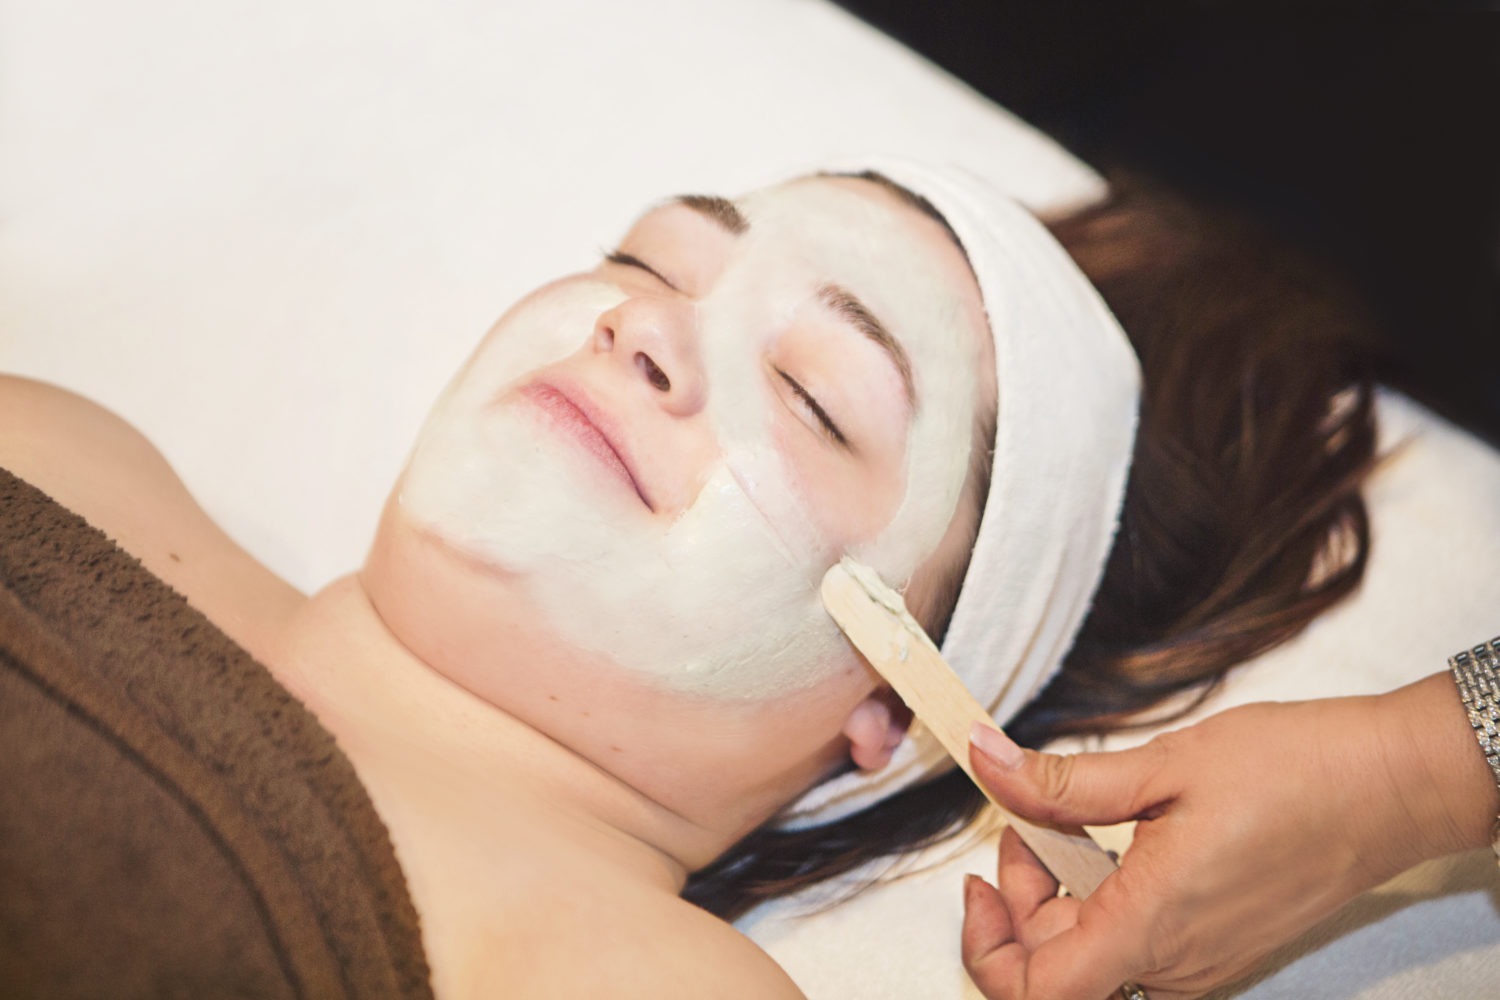 Rejuvenate, nourish, skin with our customized skin care options